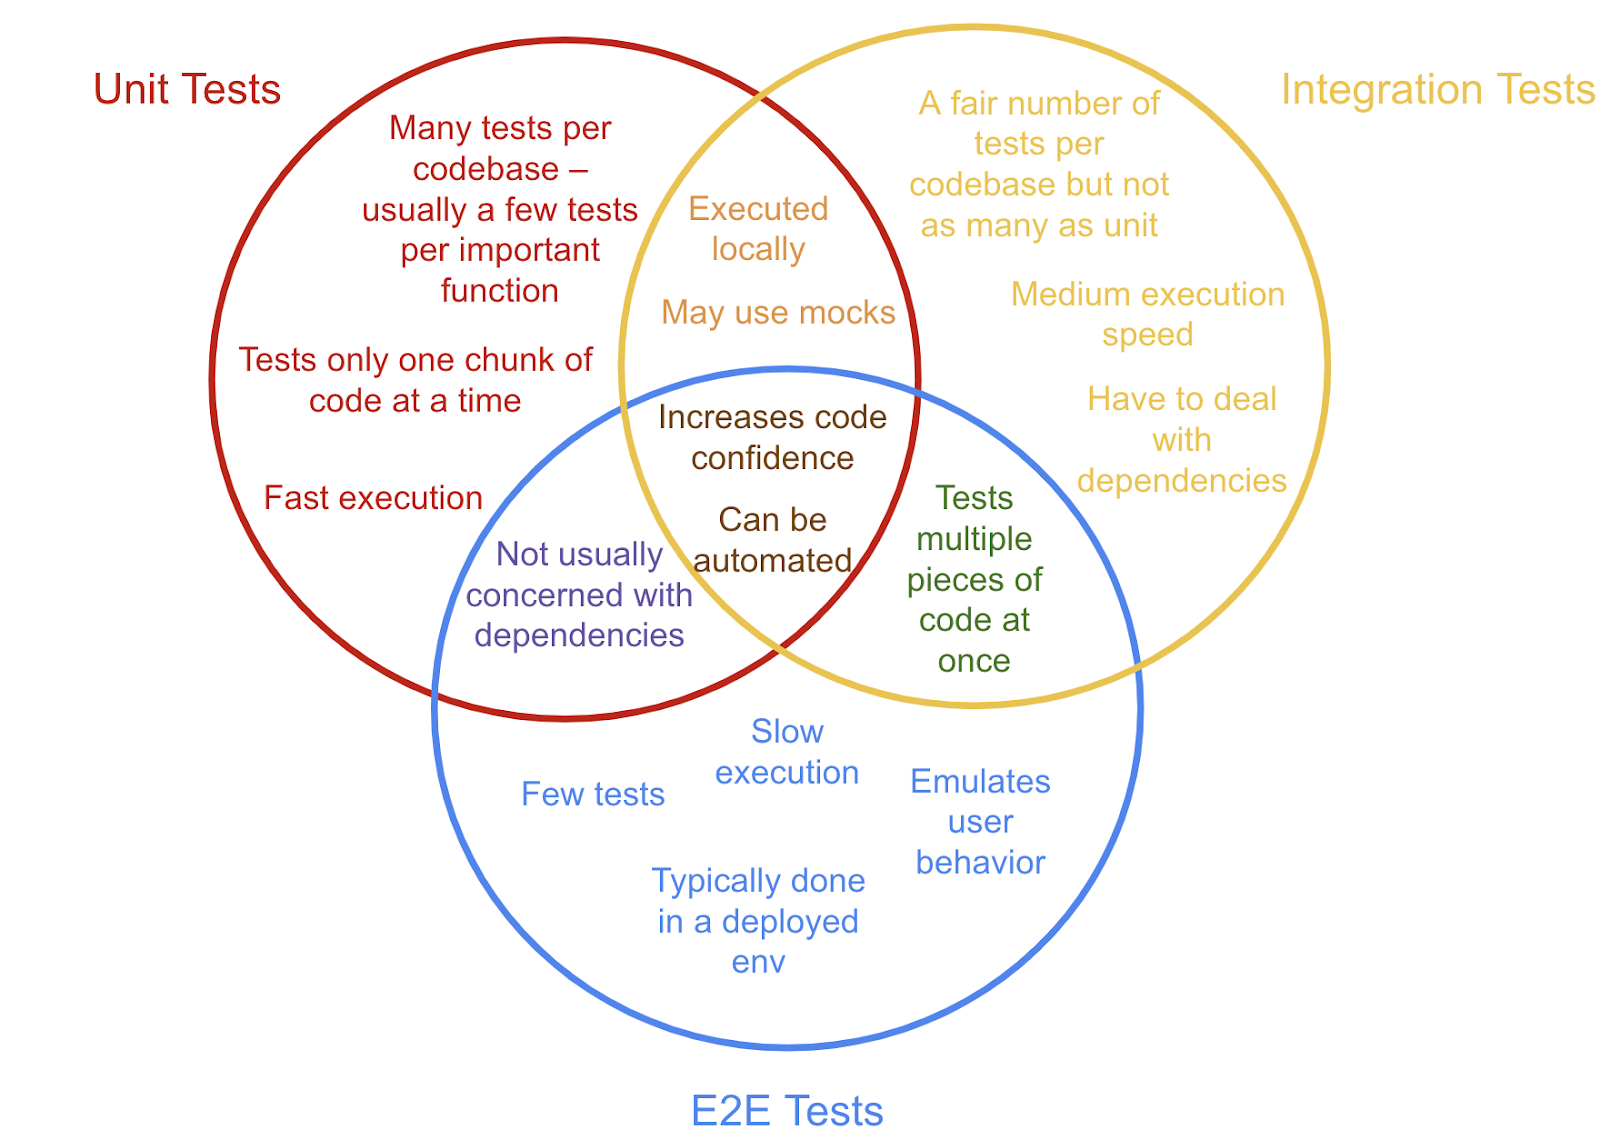 Triple venn diagram for Unit Tests, Integration Tests, and E2E with pros and cons in each section